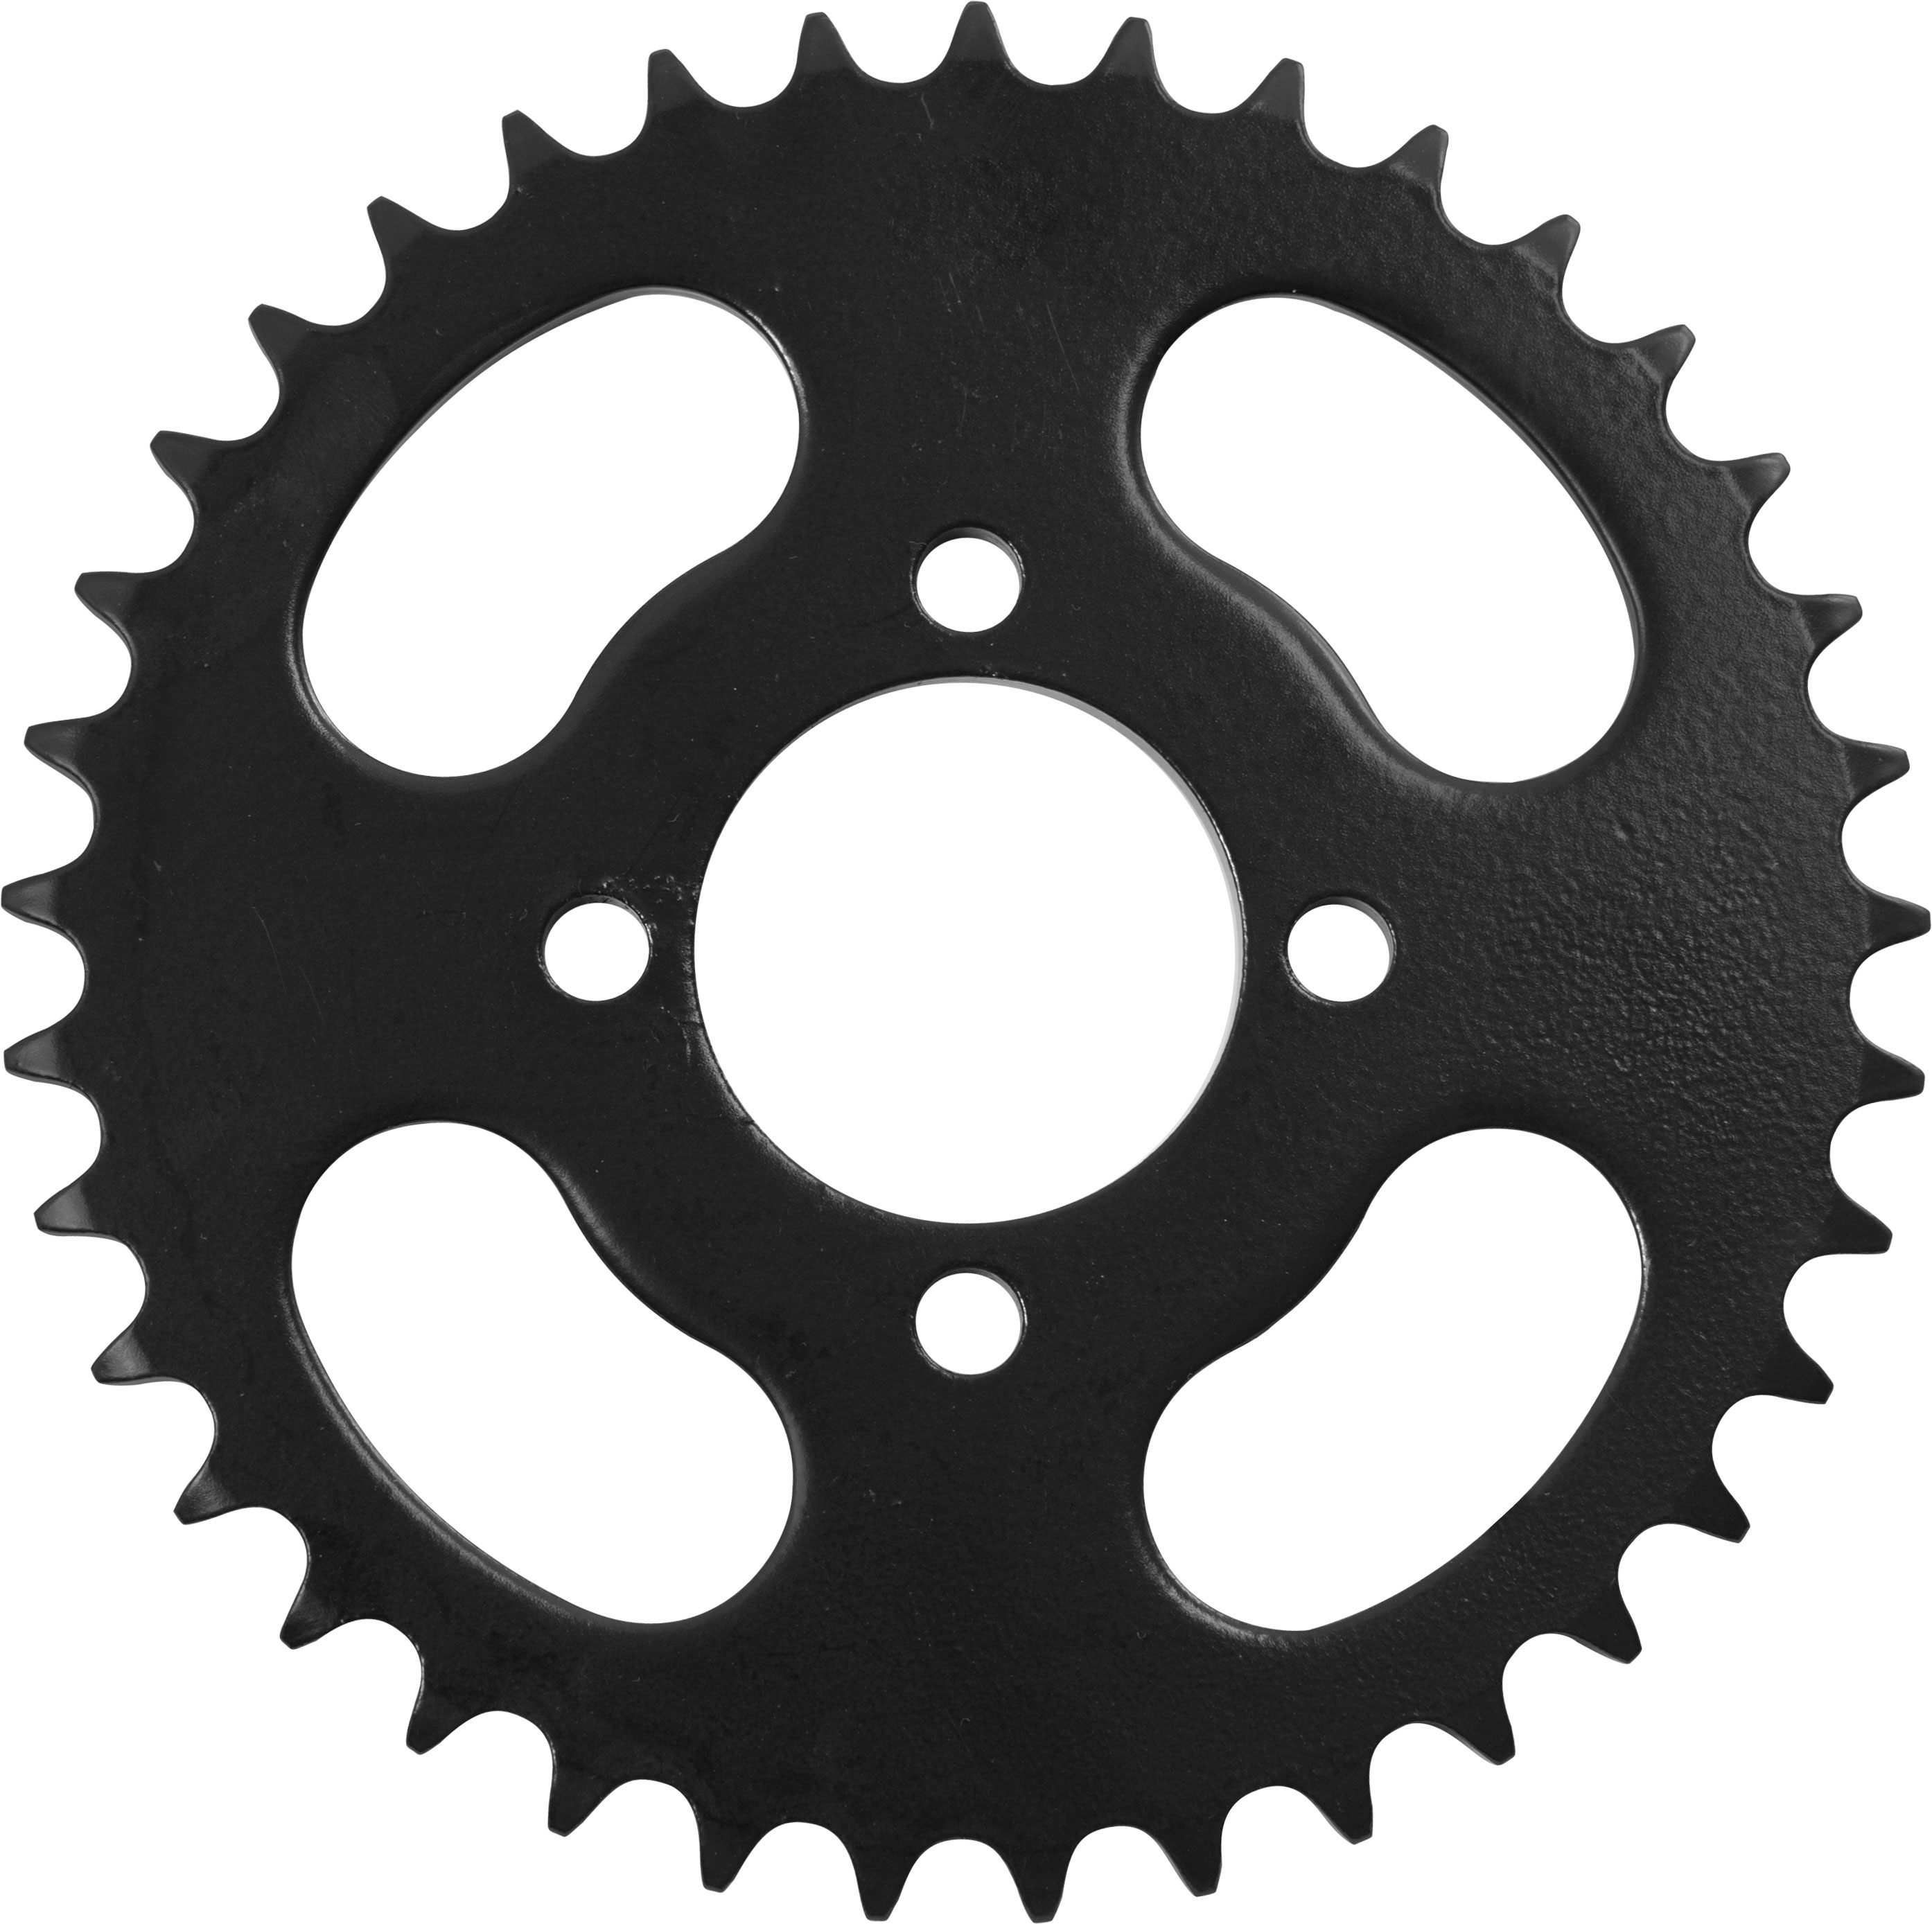 832-37 REAR SPROCKET**TO ORDER SEE DISCRIPTION**